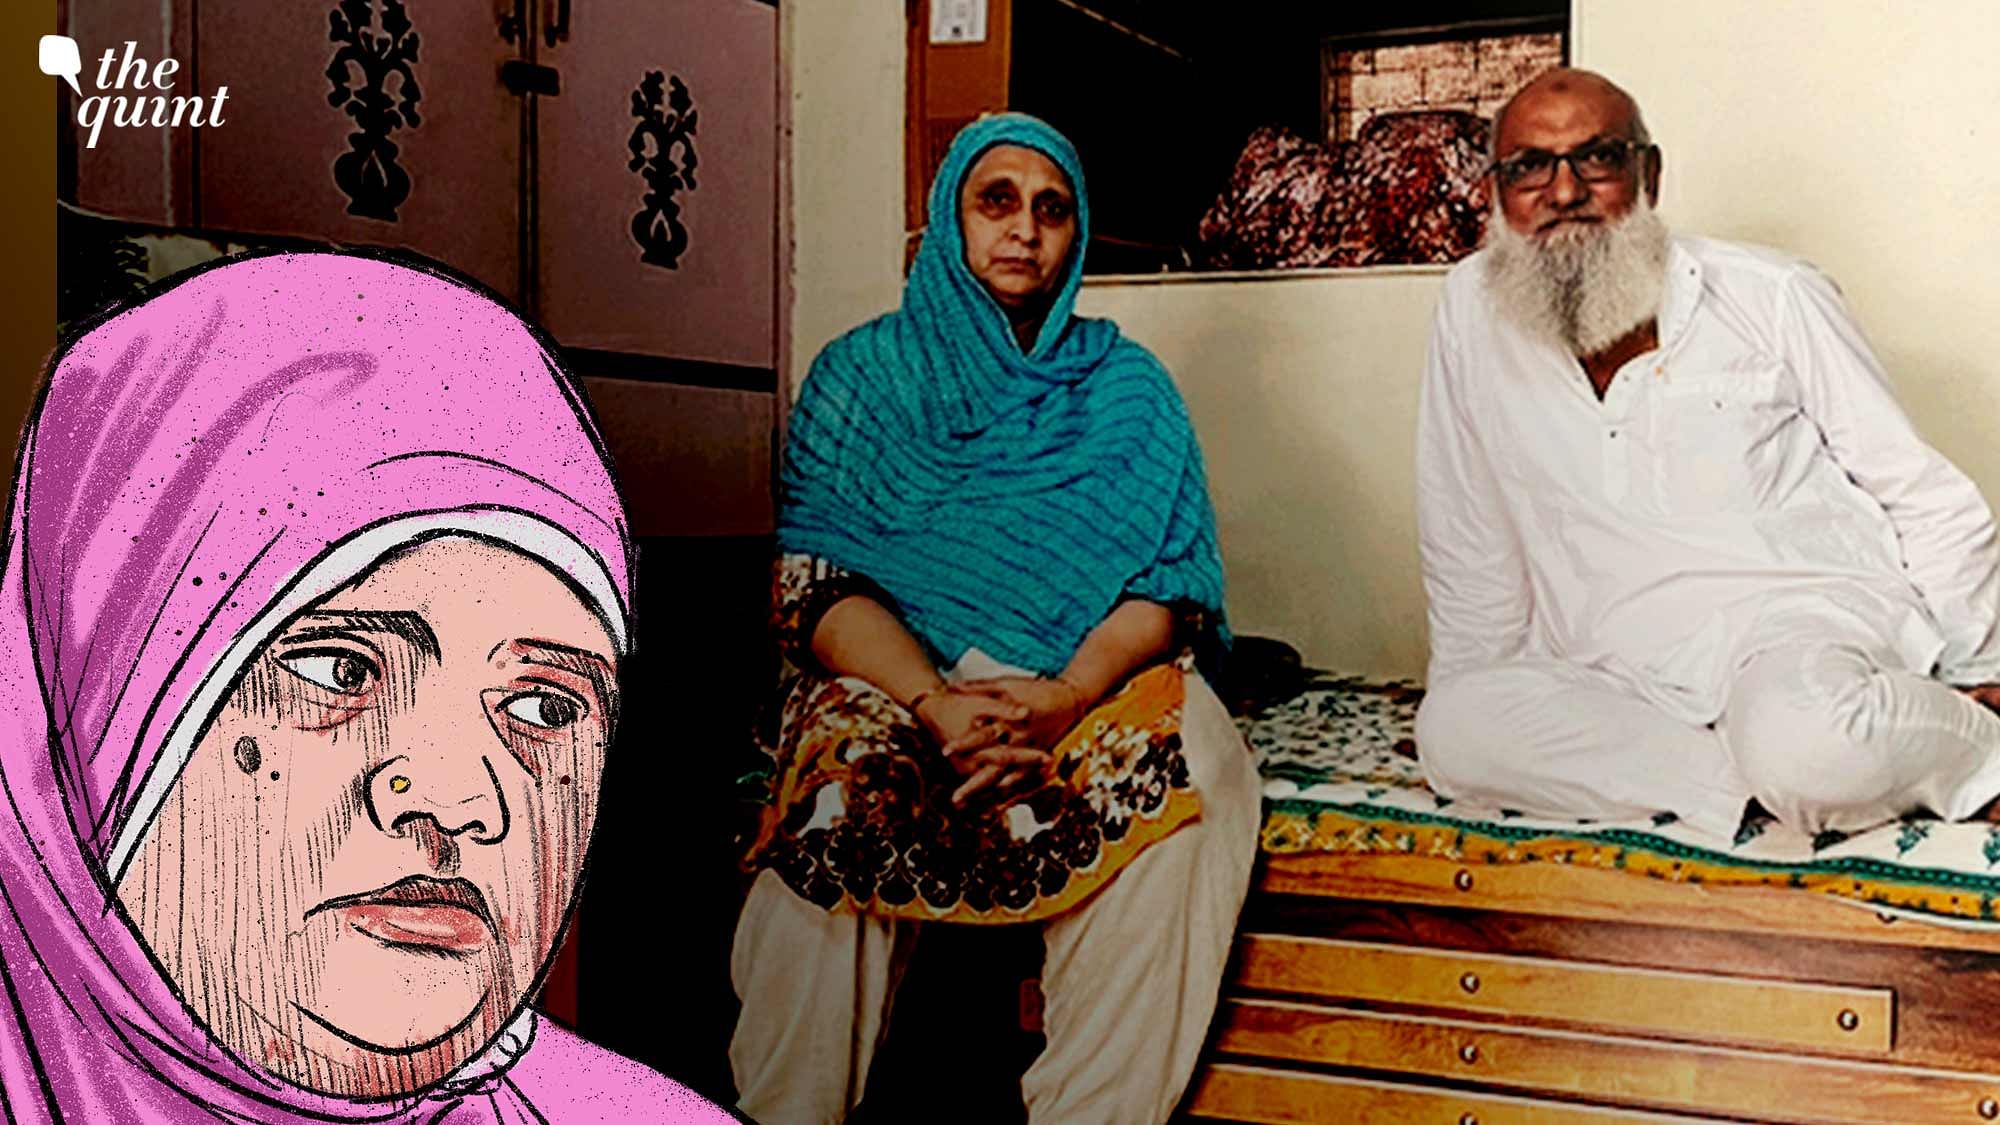 <div class="paragraphs"><p>Mohammed Yusuf and Latifa Giteli at their home in Gujarat's Godhra where they sheltered Bilkis Bano in 2002.</p></div>